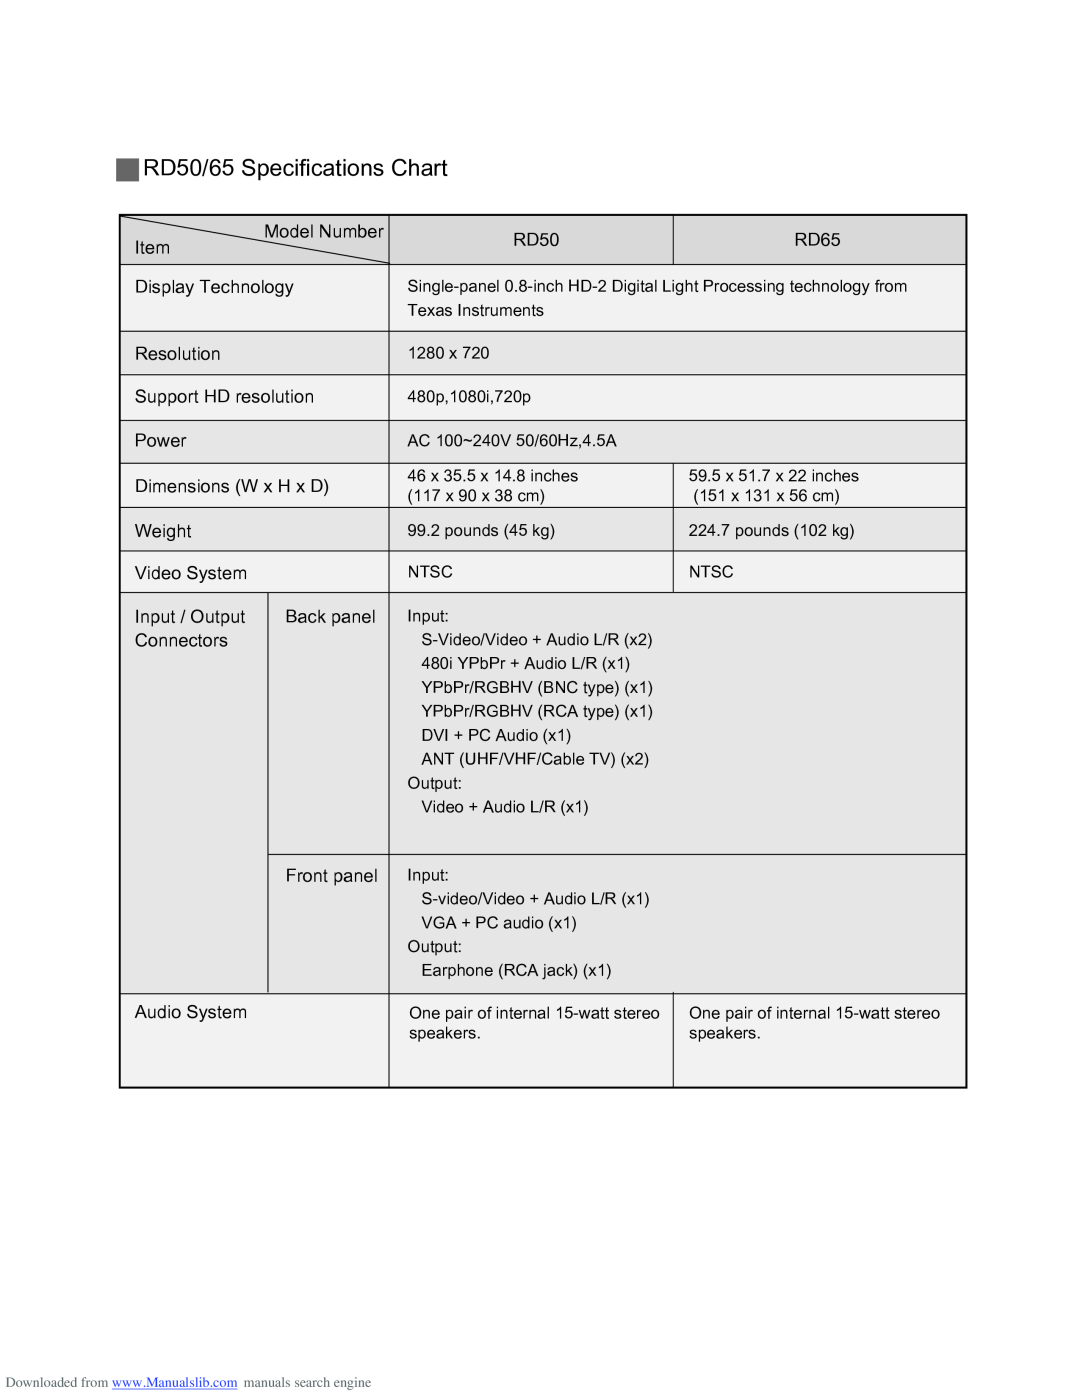 Optoma Technology RD65 manual RD50/65 Specifications Chart 